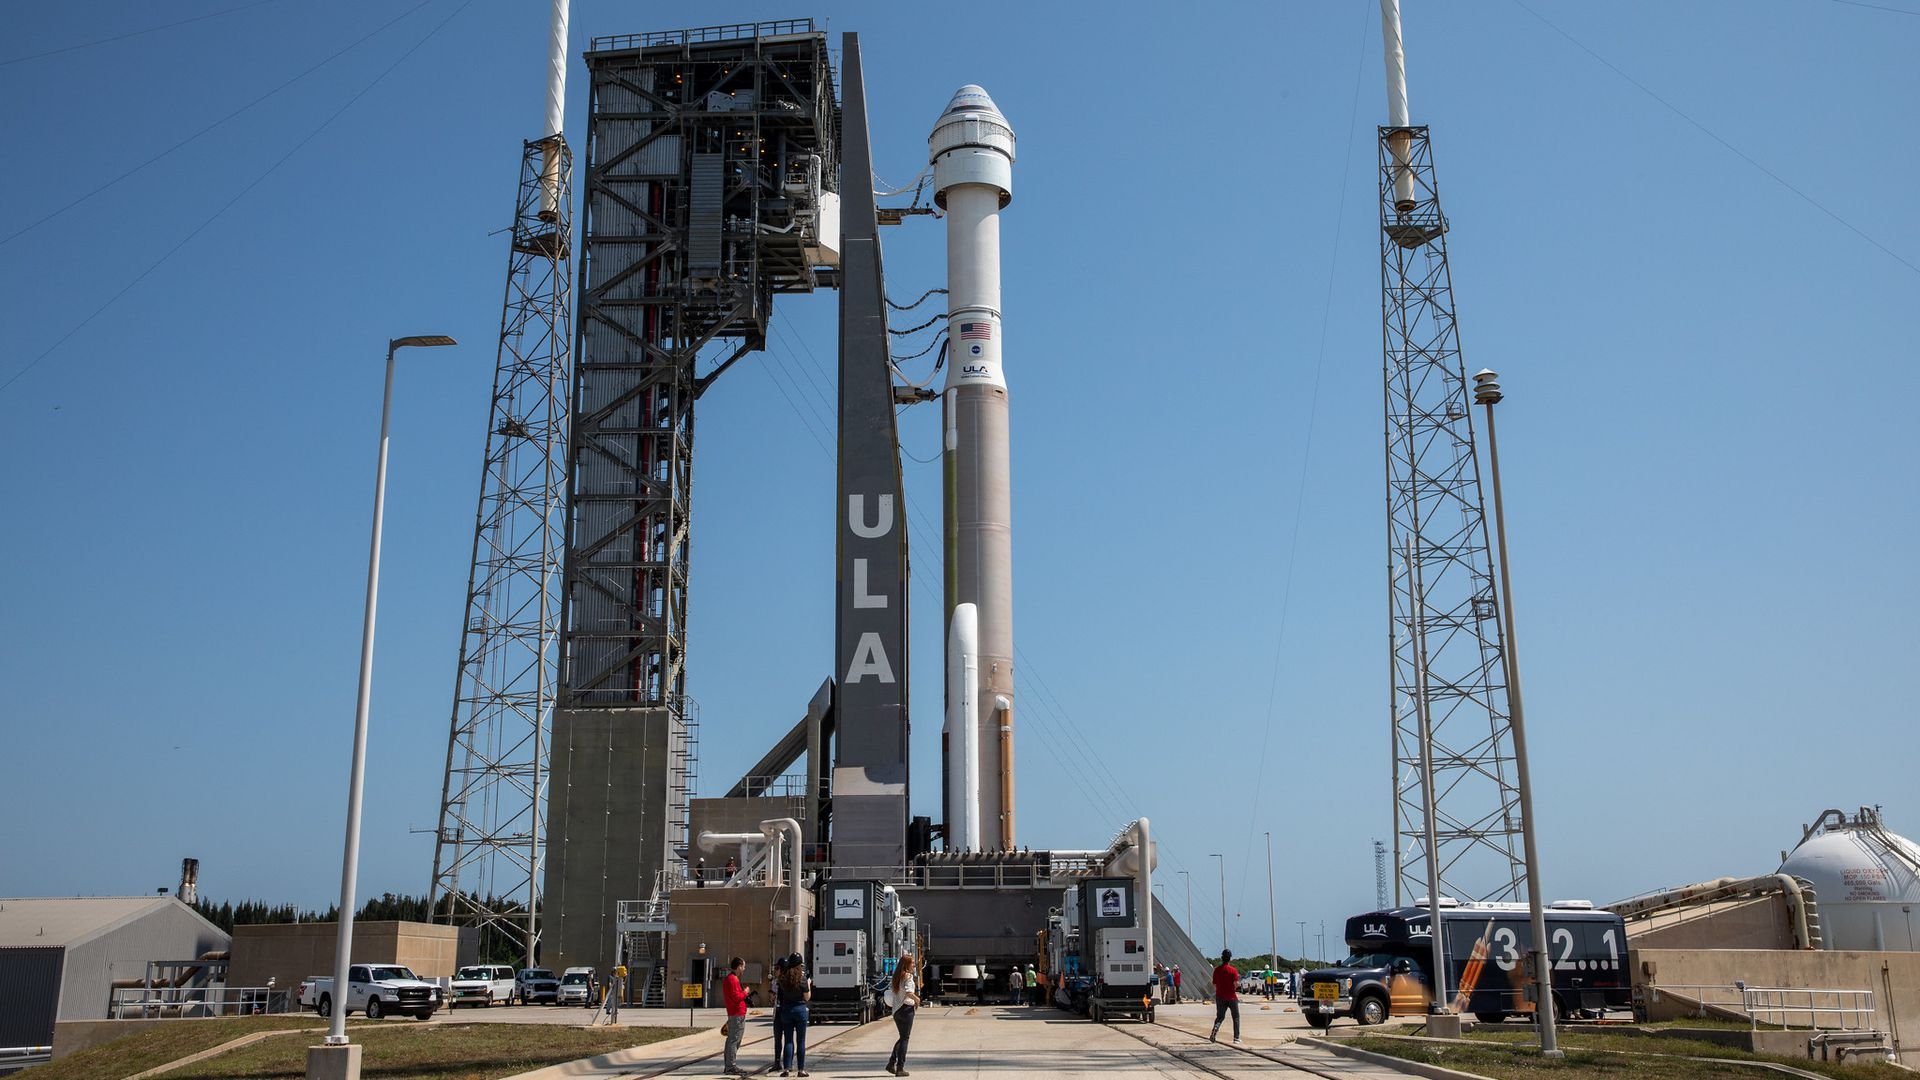 Boeing launches redo mission to the International Space Station